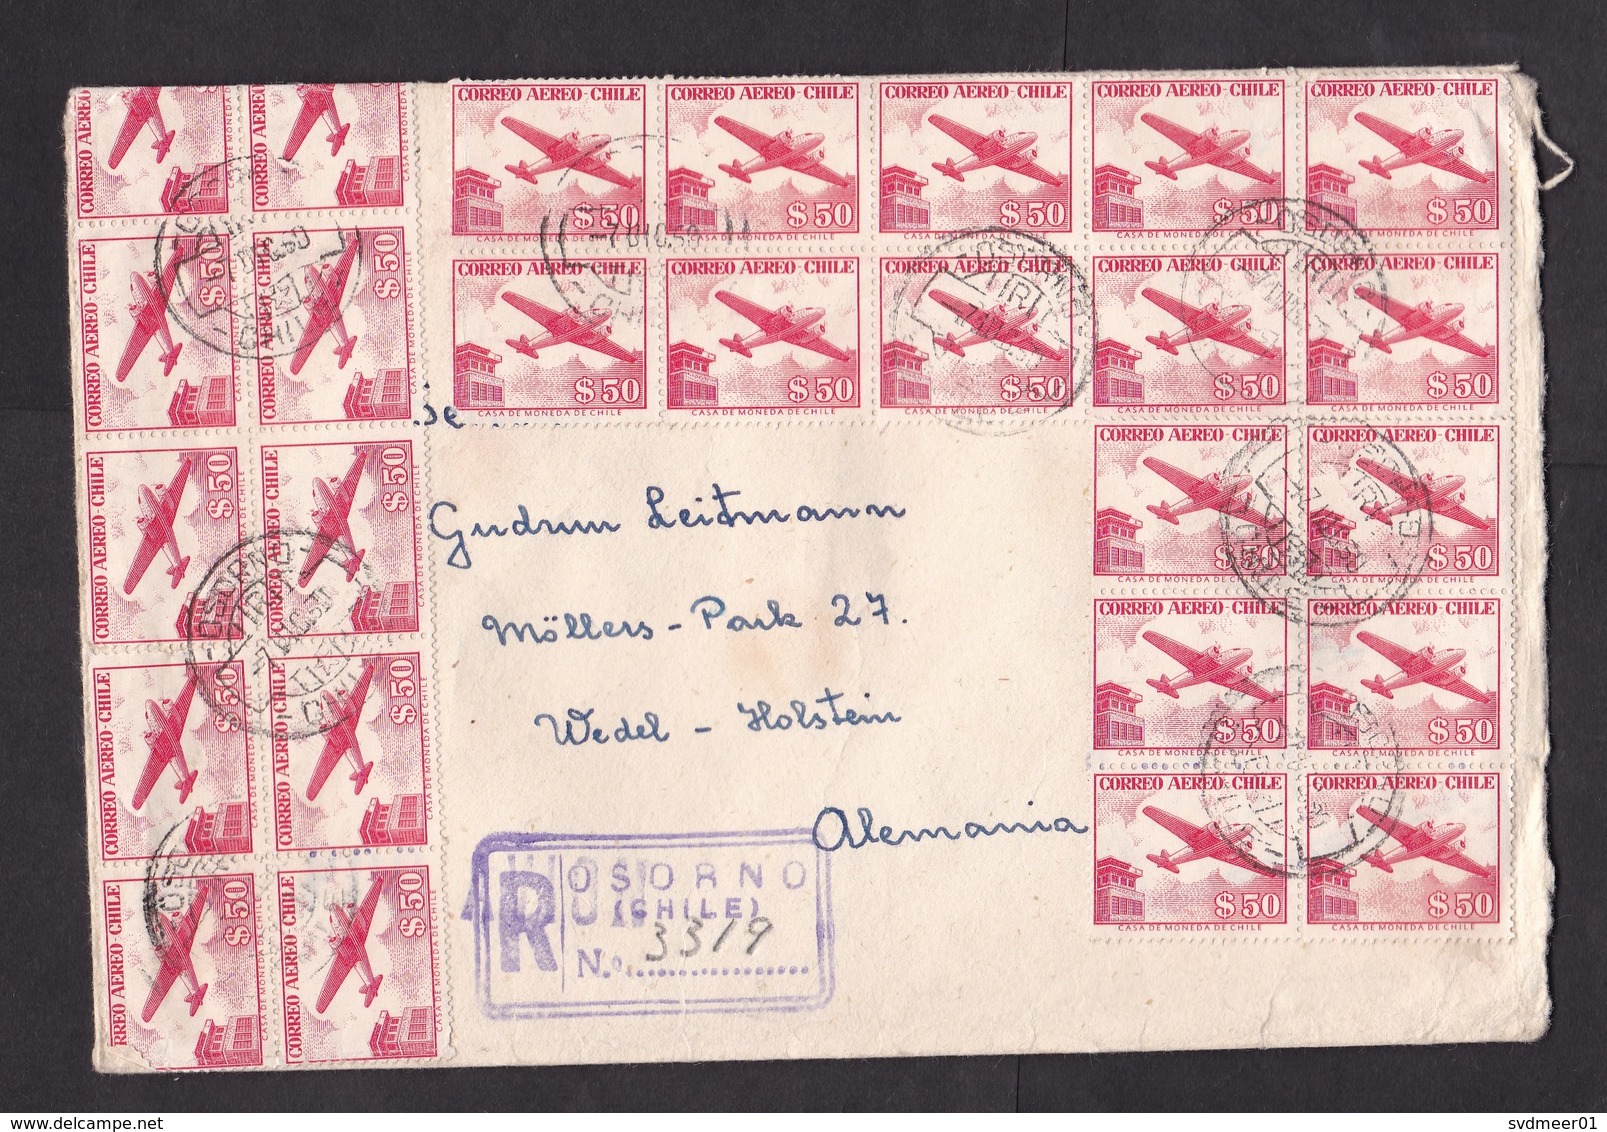 Chile: Registered Cover To Germany, 1960, 26 Stamps, Airplane, Inflation, Wax At Back (minor Damage, See Scan) - Chili